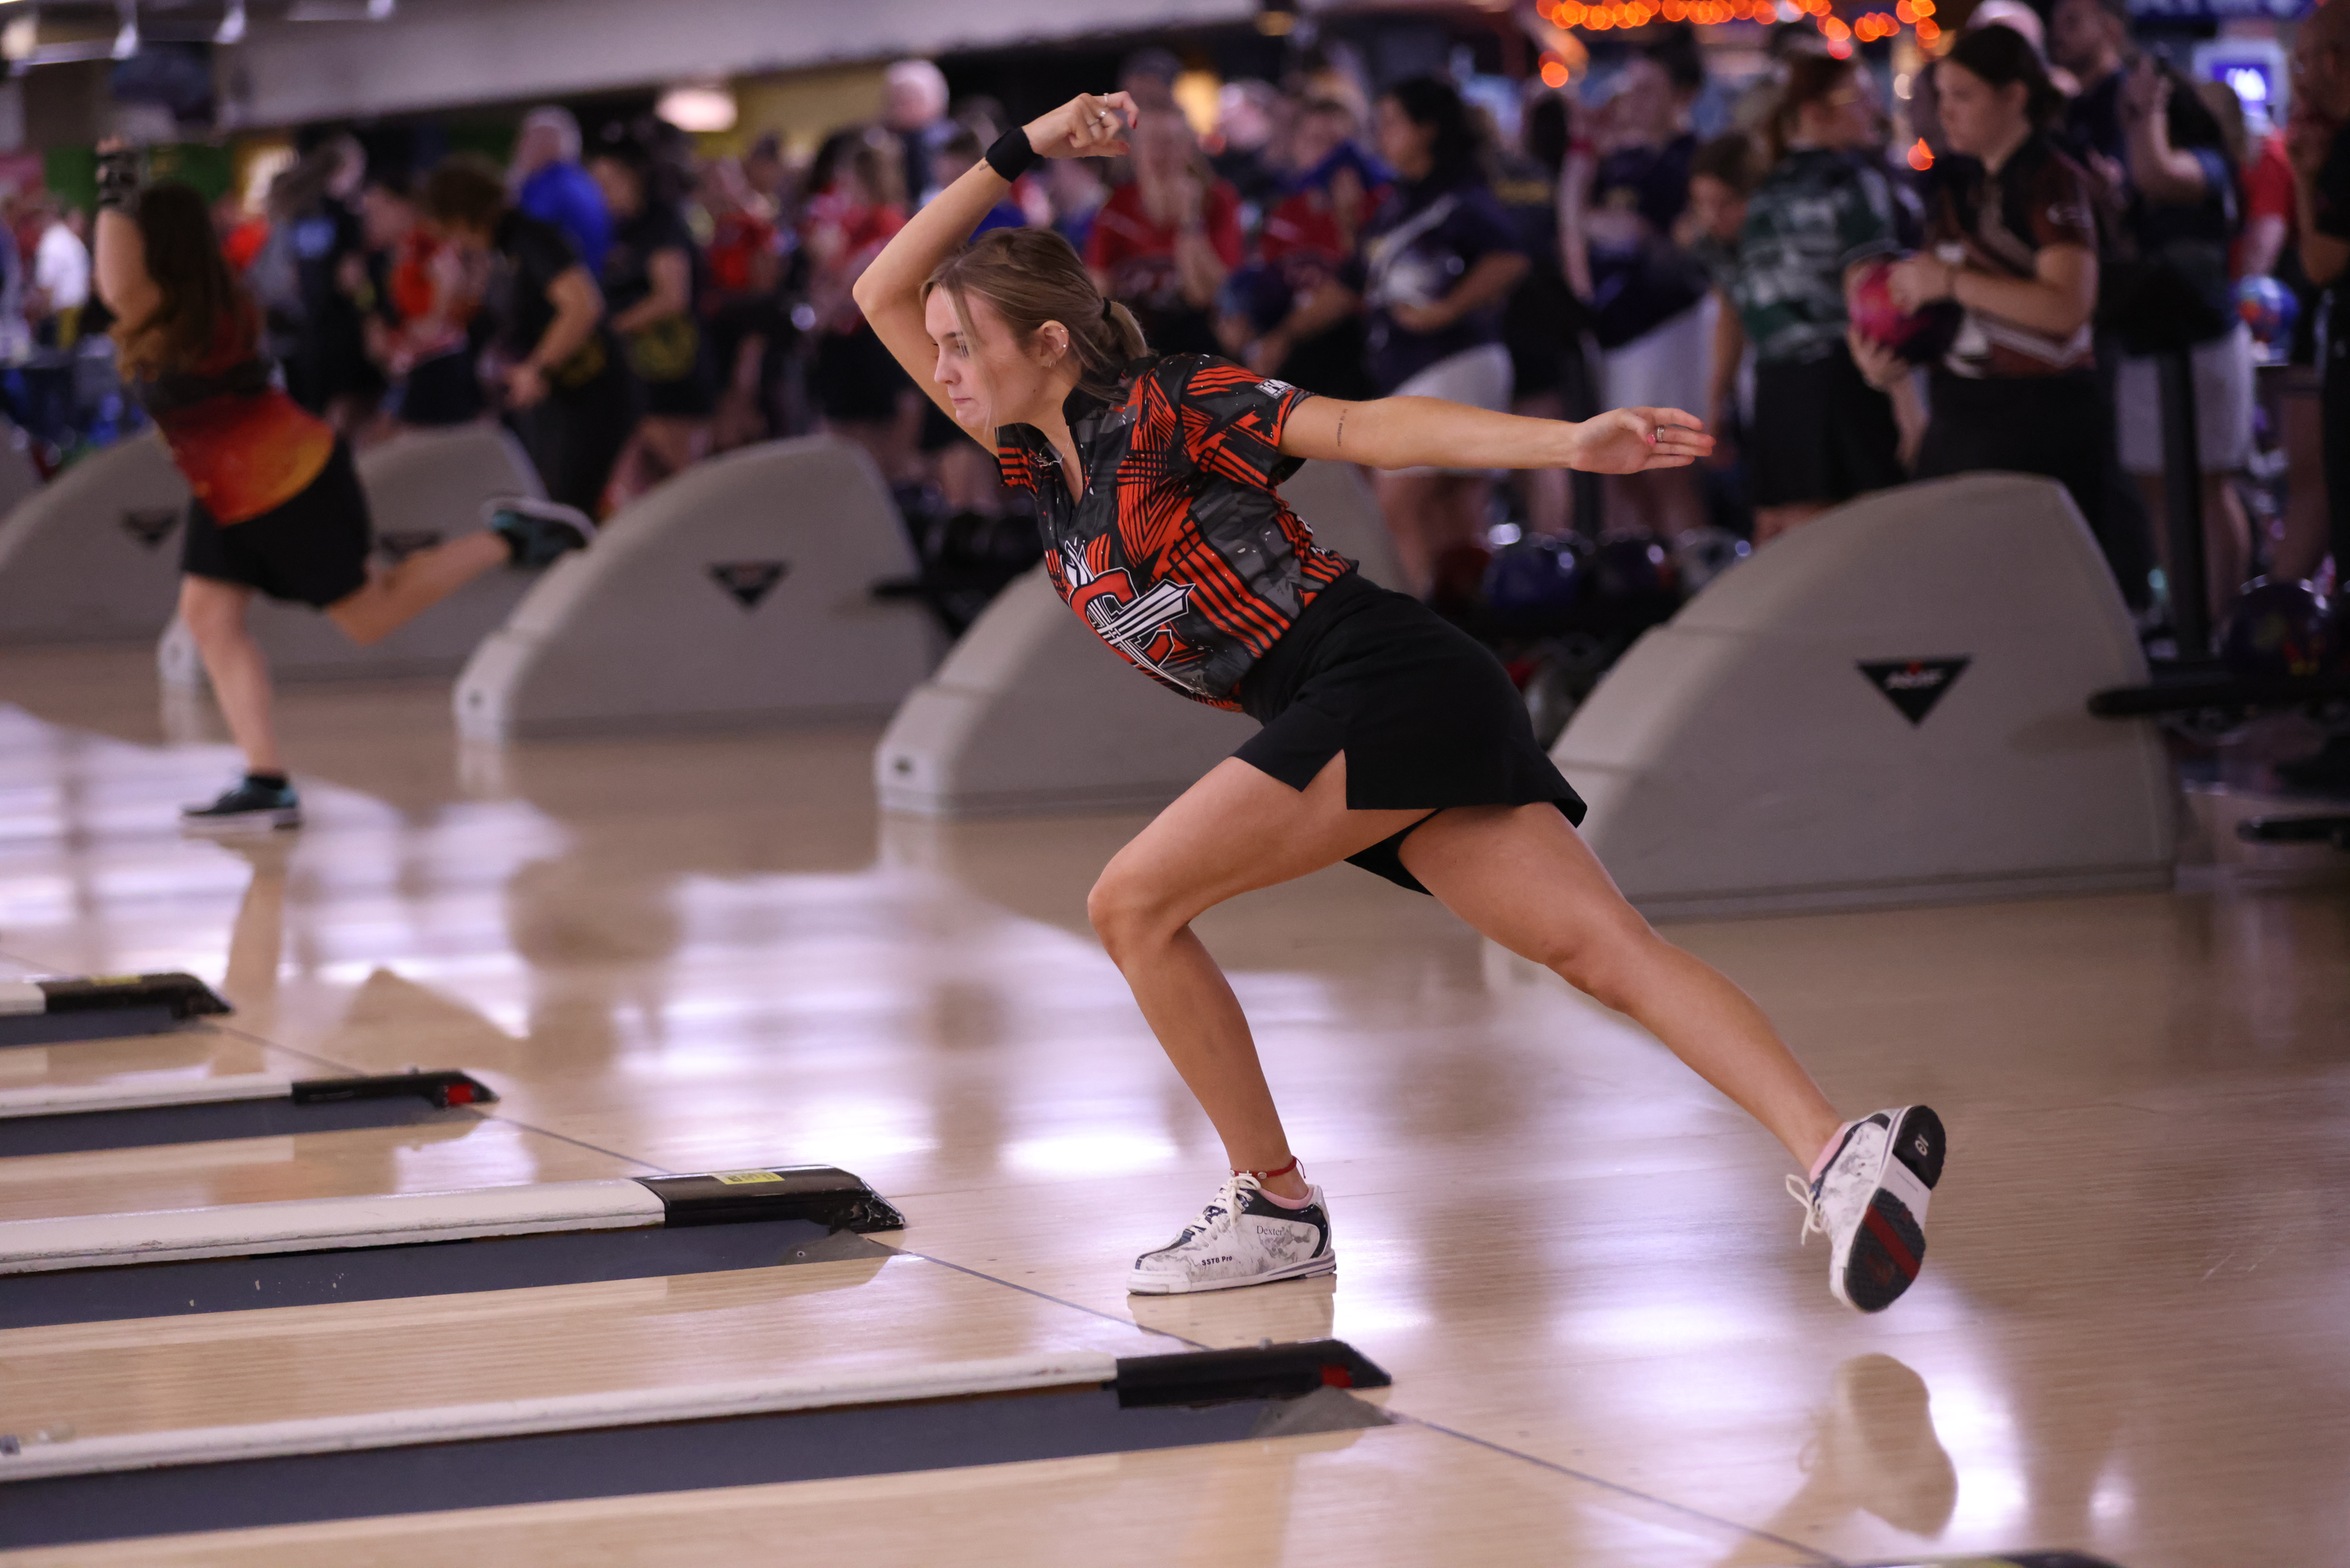 Women's Bowling finishes WHAC Jamboree #2 in fifth